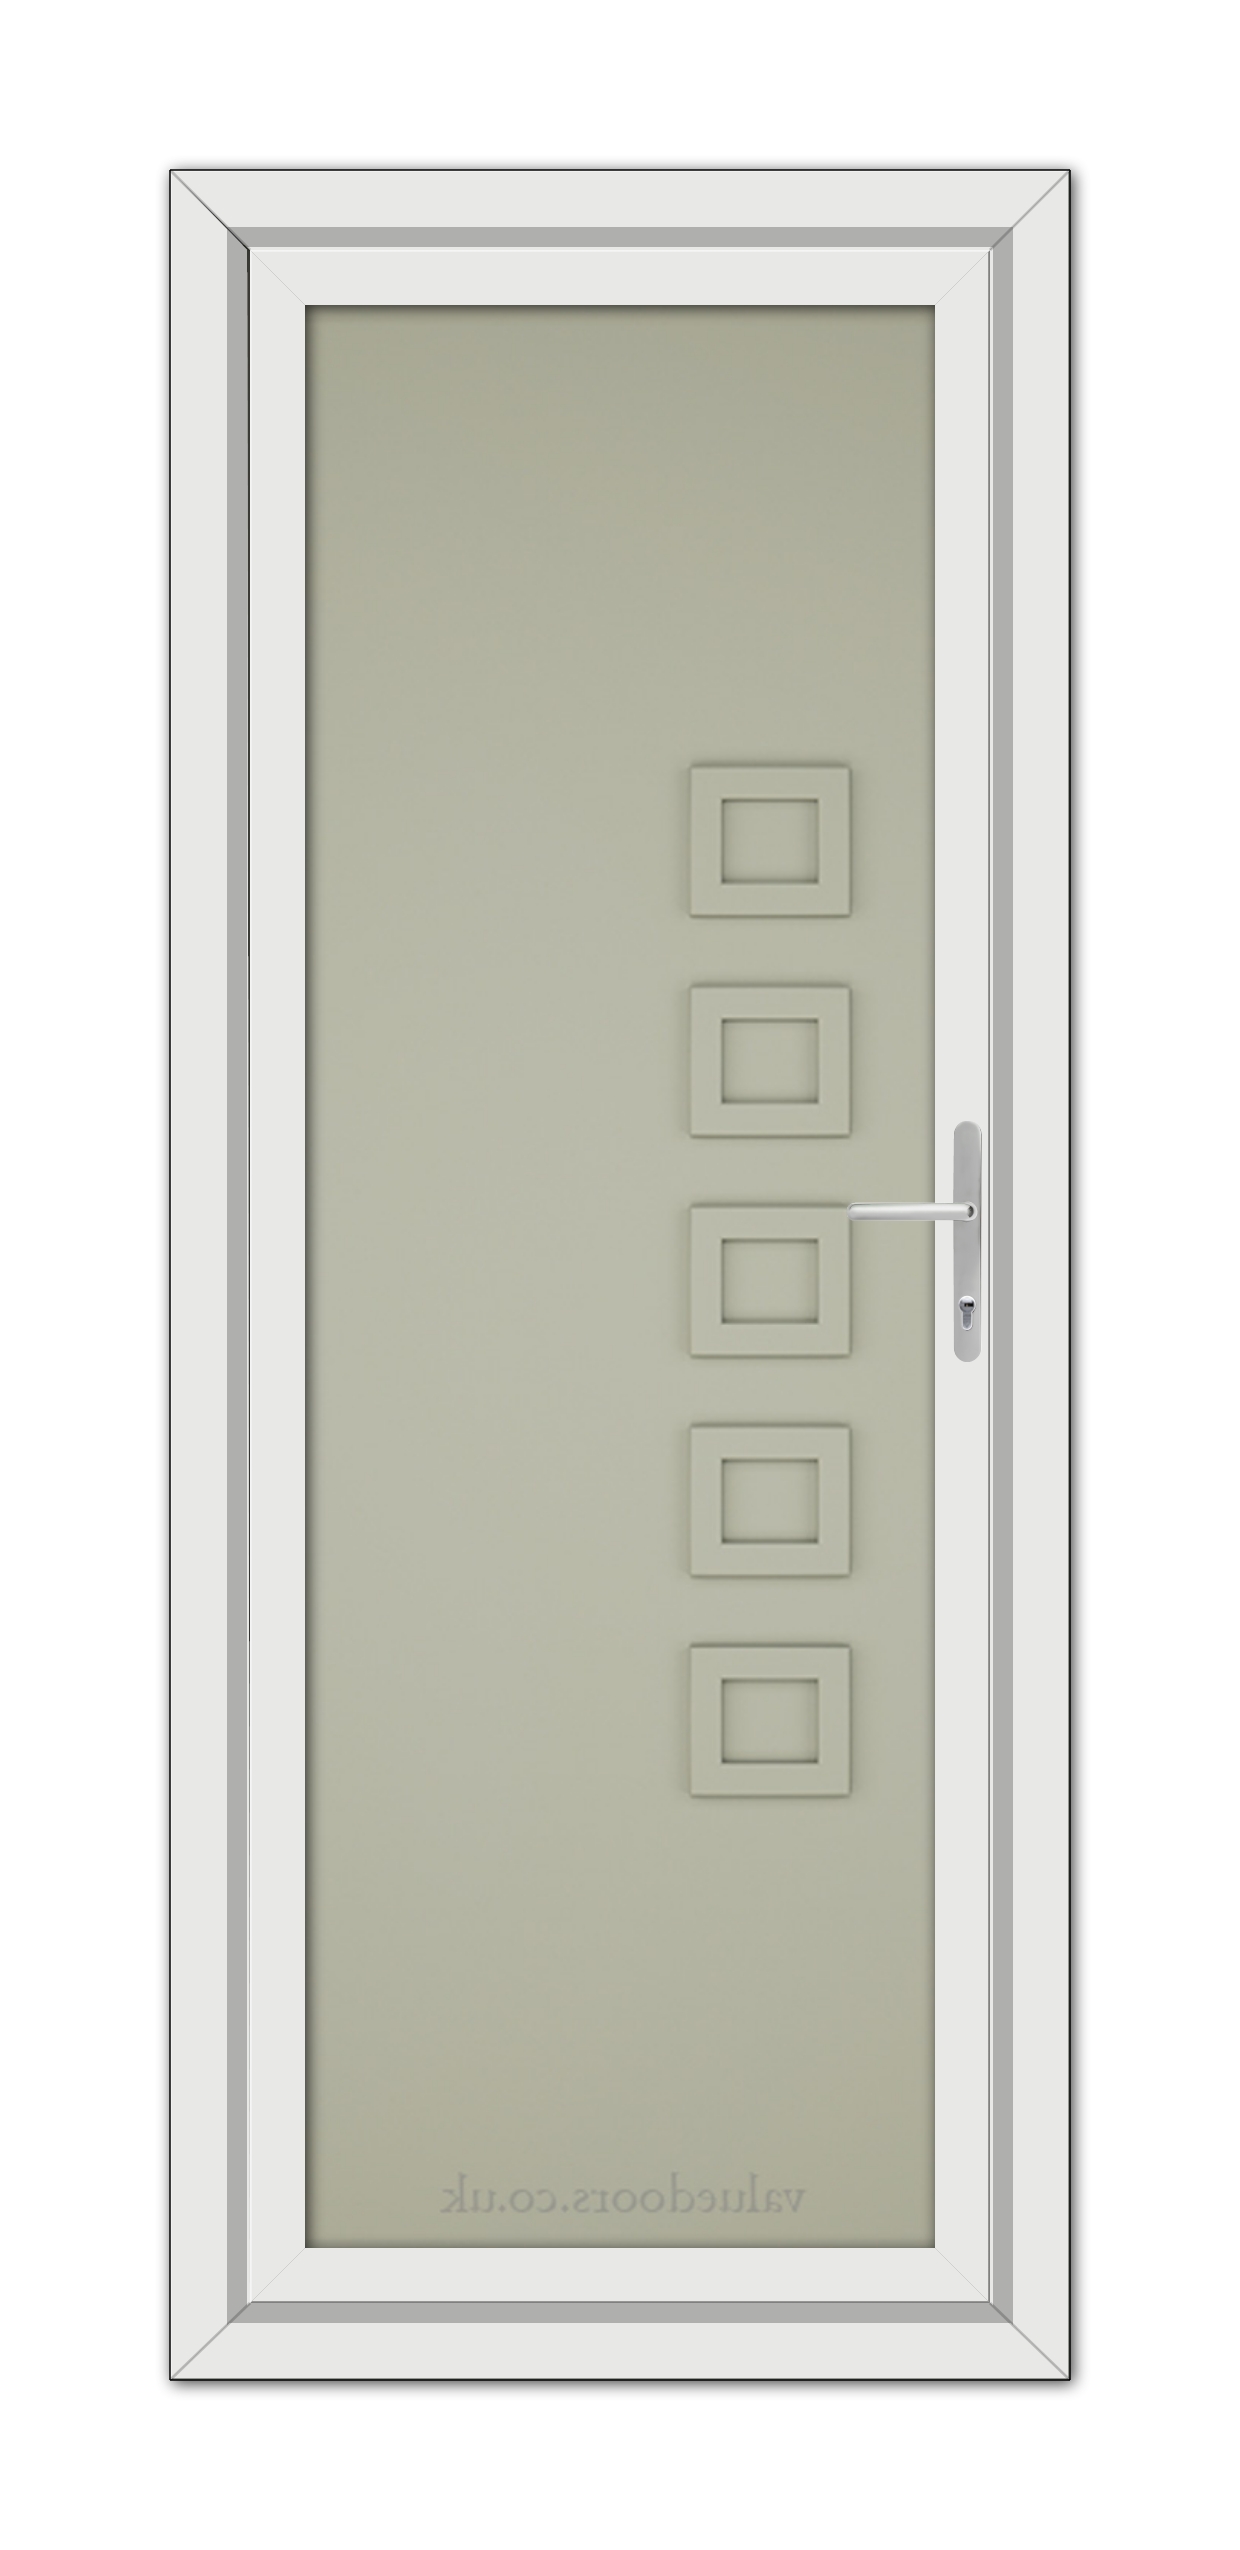 A modern Agate Grey Malaga Solid uPVC Door with a frosted glass pane featuring five square windows, framed in white, with a metallic handle on the right.